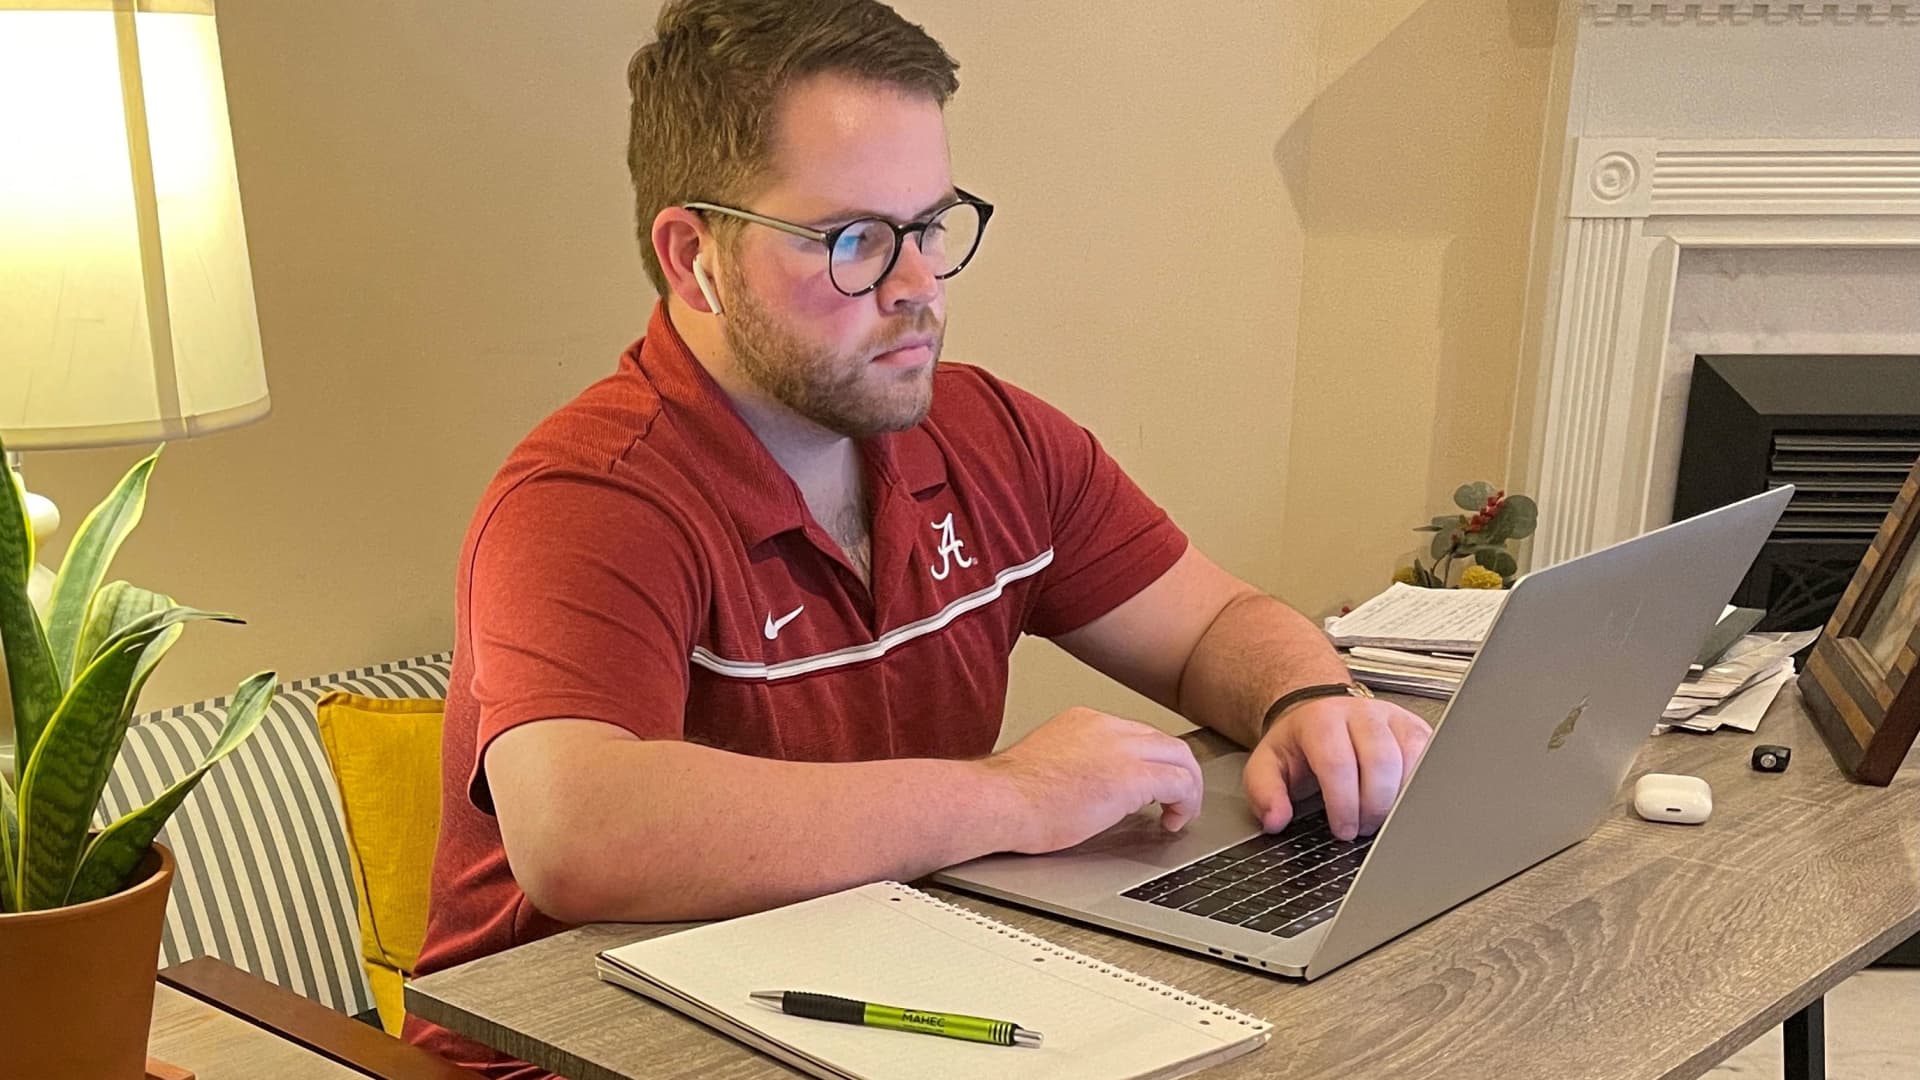 Phillip Braswell, a recent graduate of the University of Alabama at Birmingham School of Medicine, is working as a contact tracer for the Alabama Department of Health.